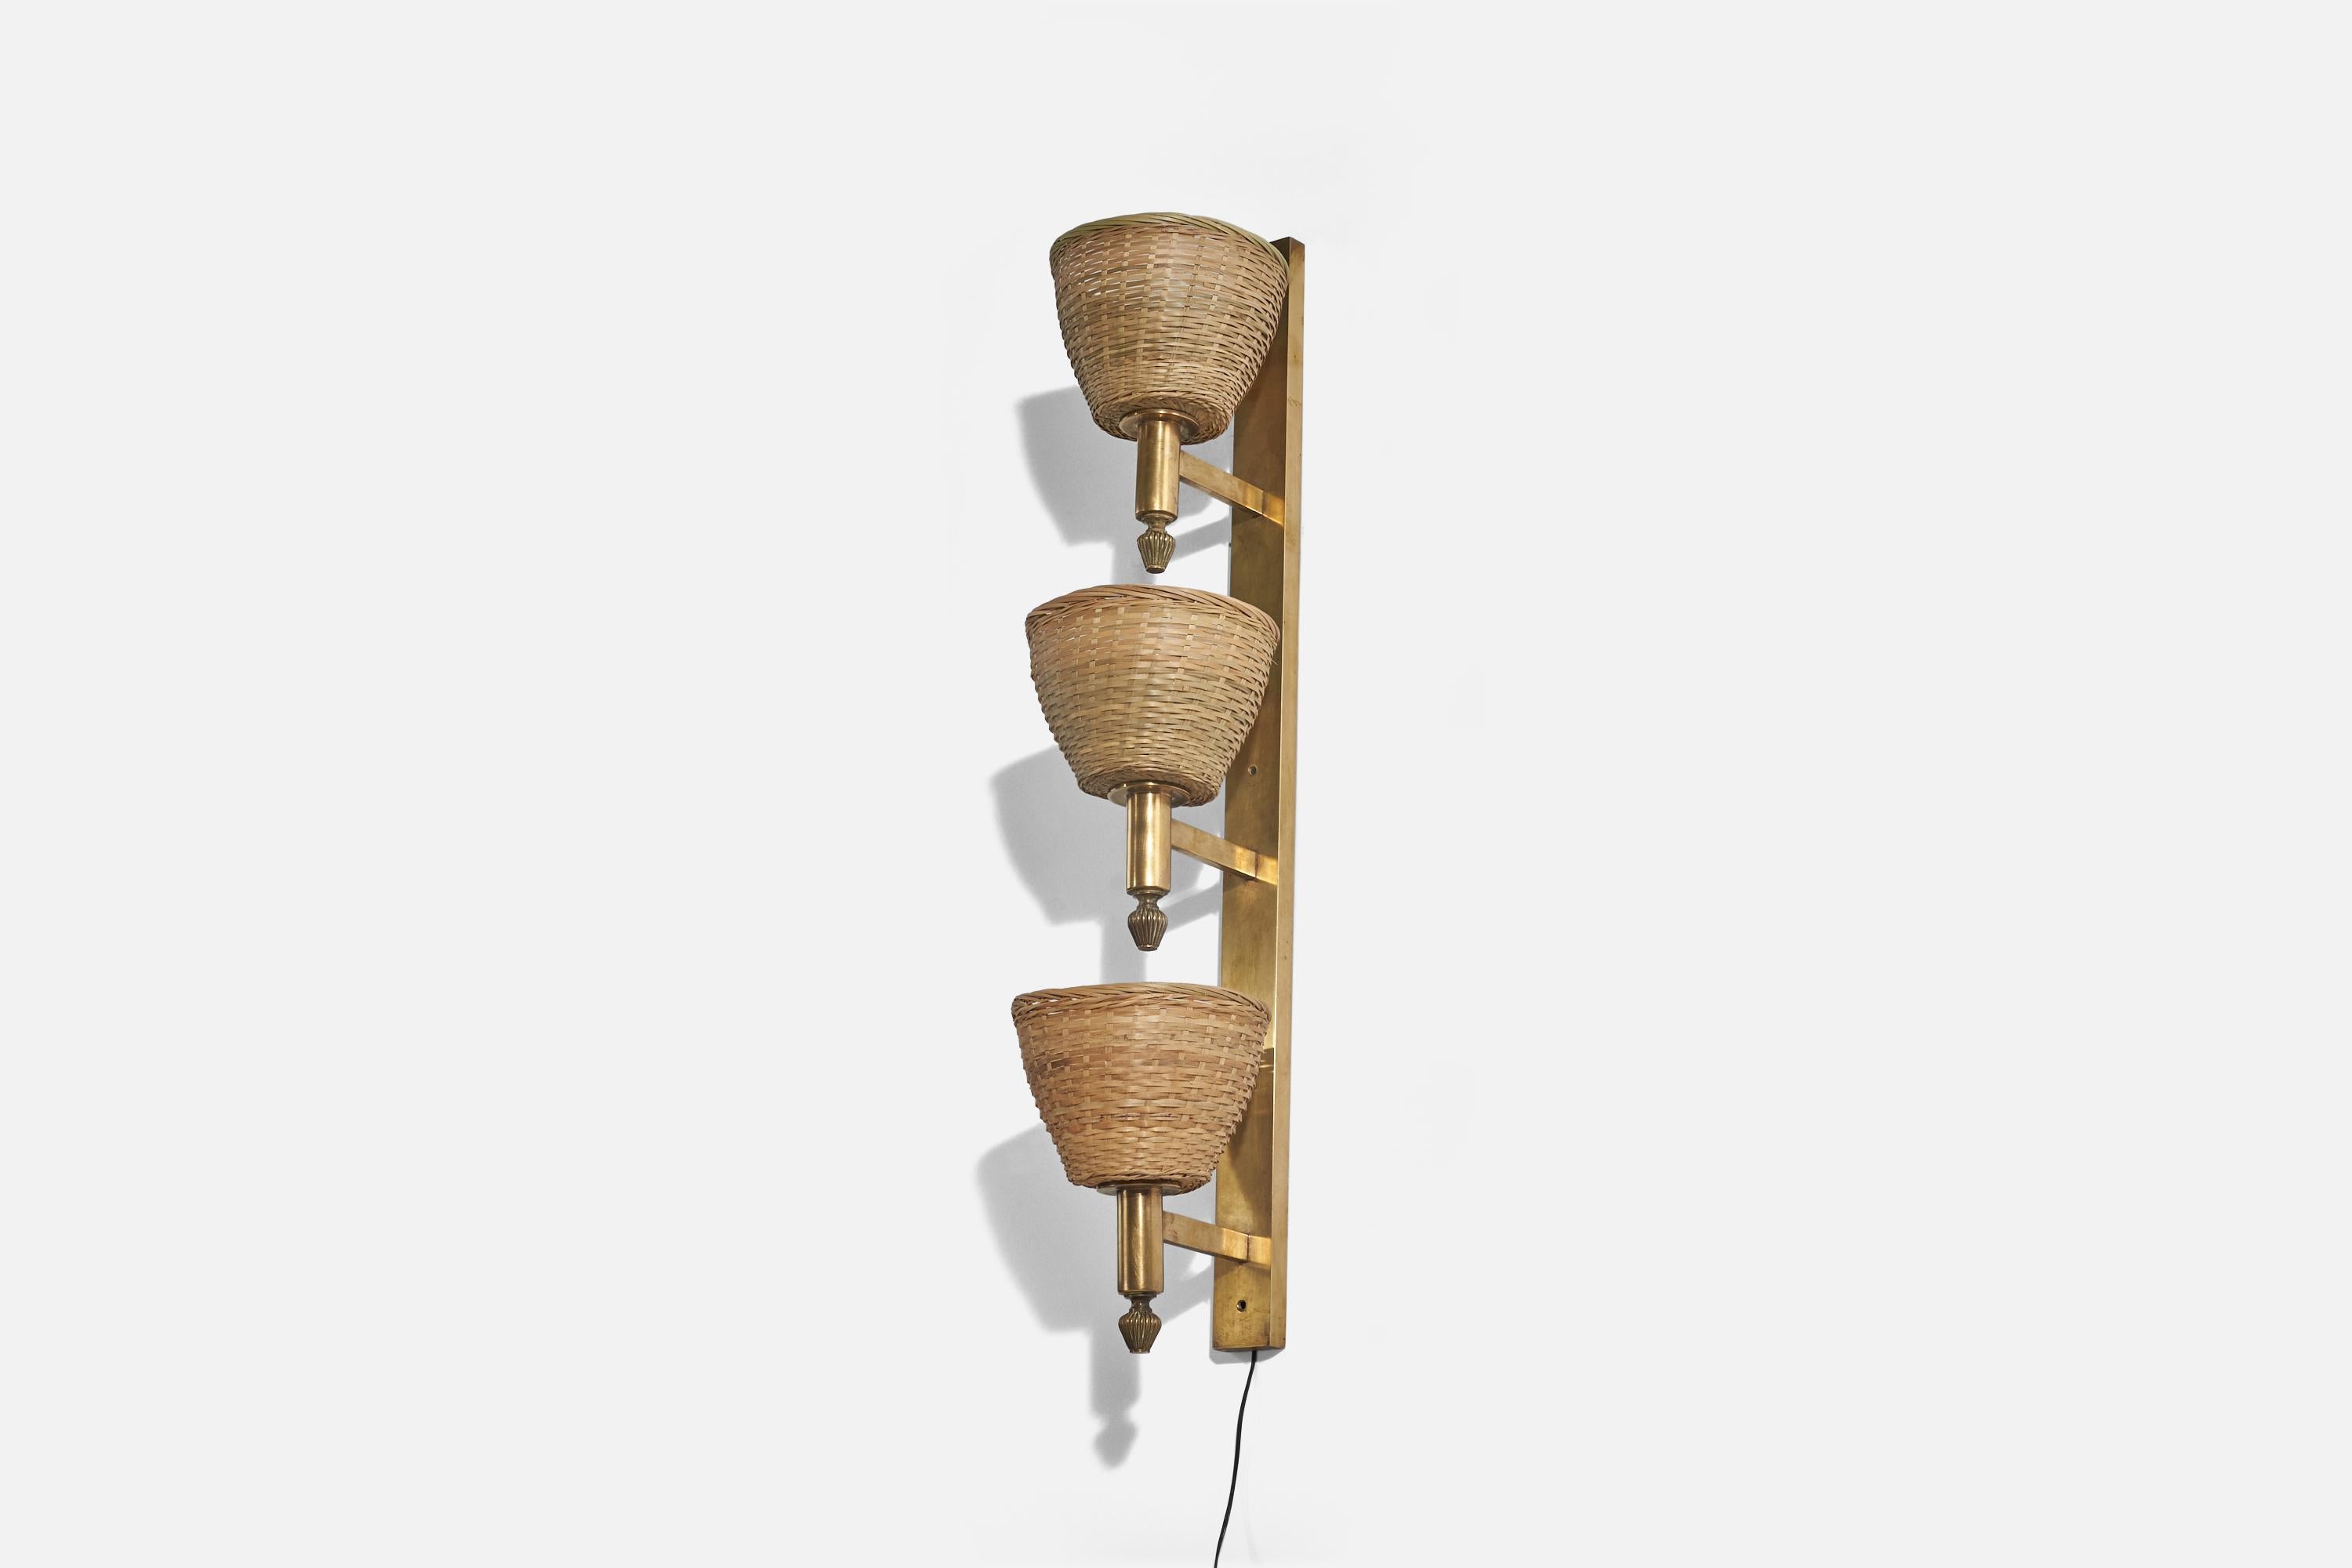 A brass and rattan, 3-light sconce / wall light designed and produced by an Italian designer, Italy, 1940s.

Sold with Lampshade(s). 
Dimensions of Back Plate (inches) : 33.43 x 1.97 x 0.77 (Height x Width x Depth).

Socket takes standard E-26